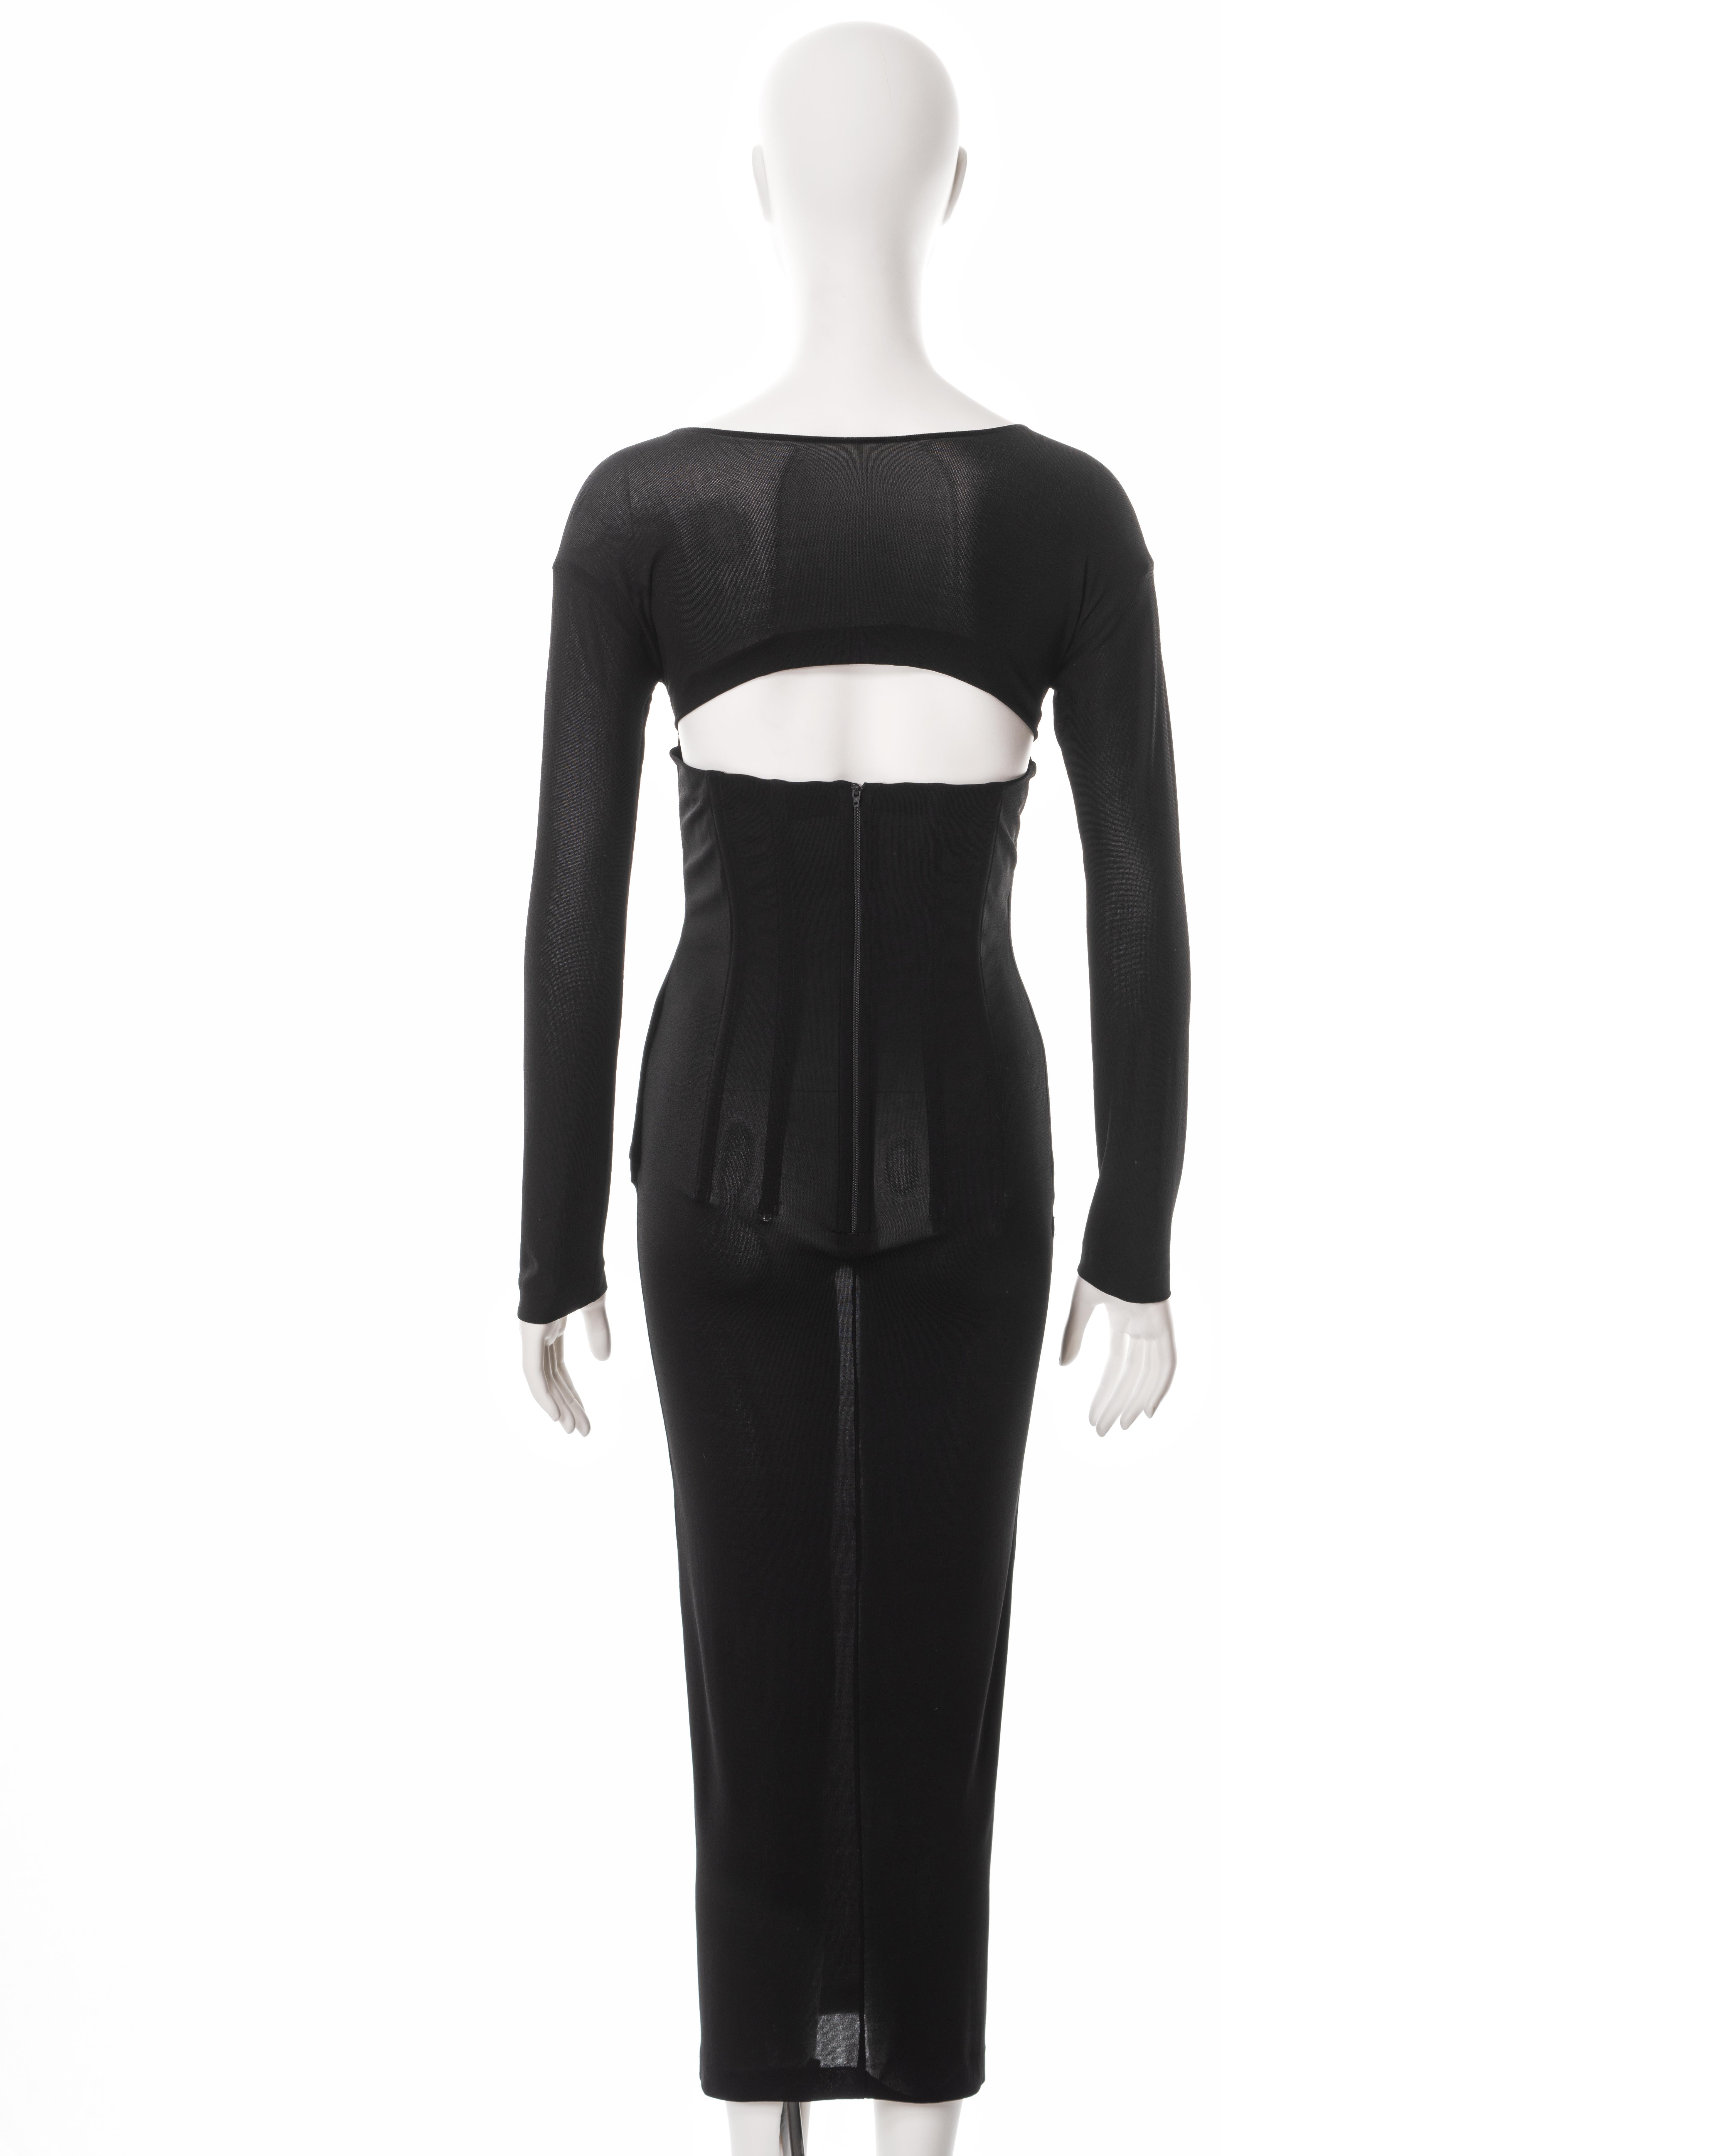 ▪ Dolce & Gabbana black long sleeve evening dress
▪ Sold by One of a Kind Archive
▪ Spring-Summer 1999
▪ Constructed from a black semi-sheer viscose-lycra mix jersey 
▪ Built-in corset bones 
▪ Long fitted sleeves
▪ Scoop neck 
▪ Centre-back zipper